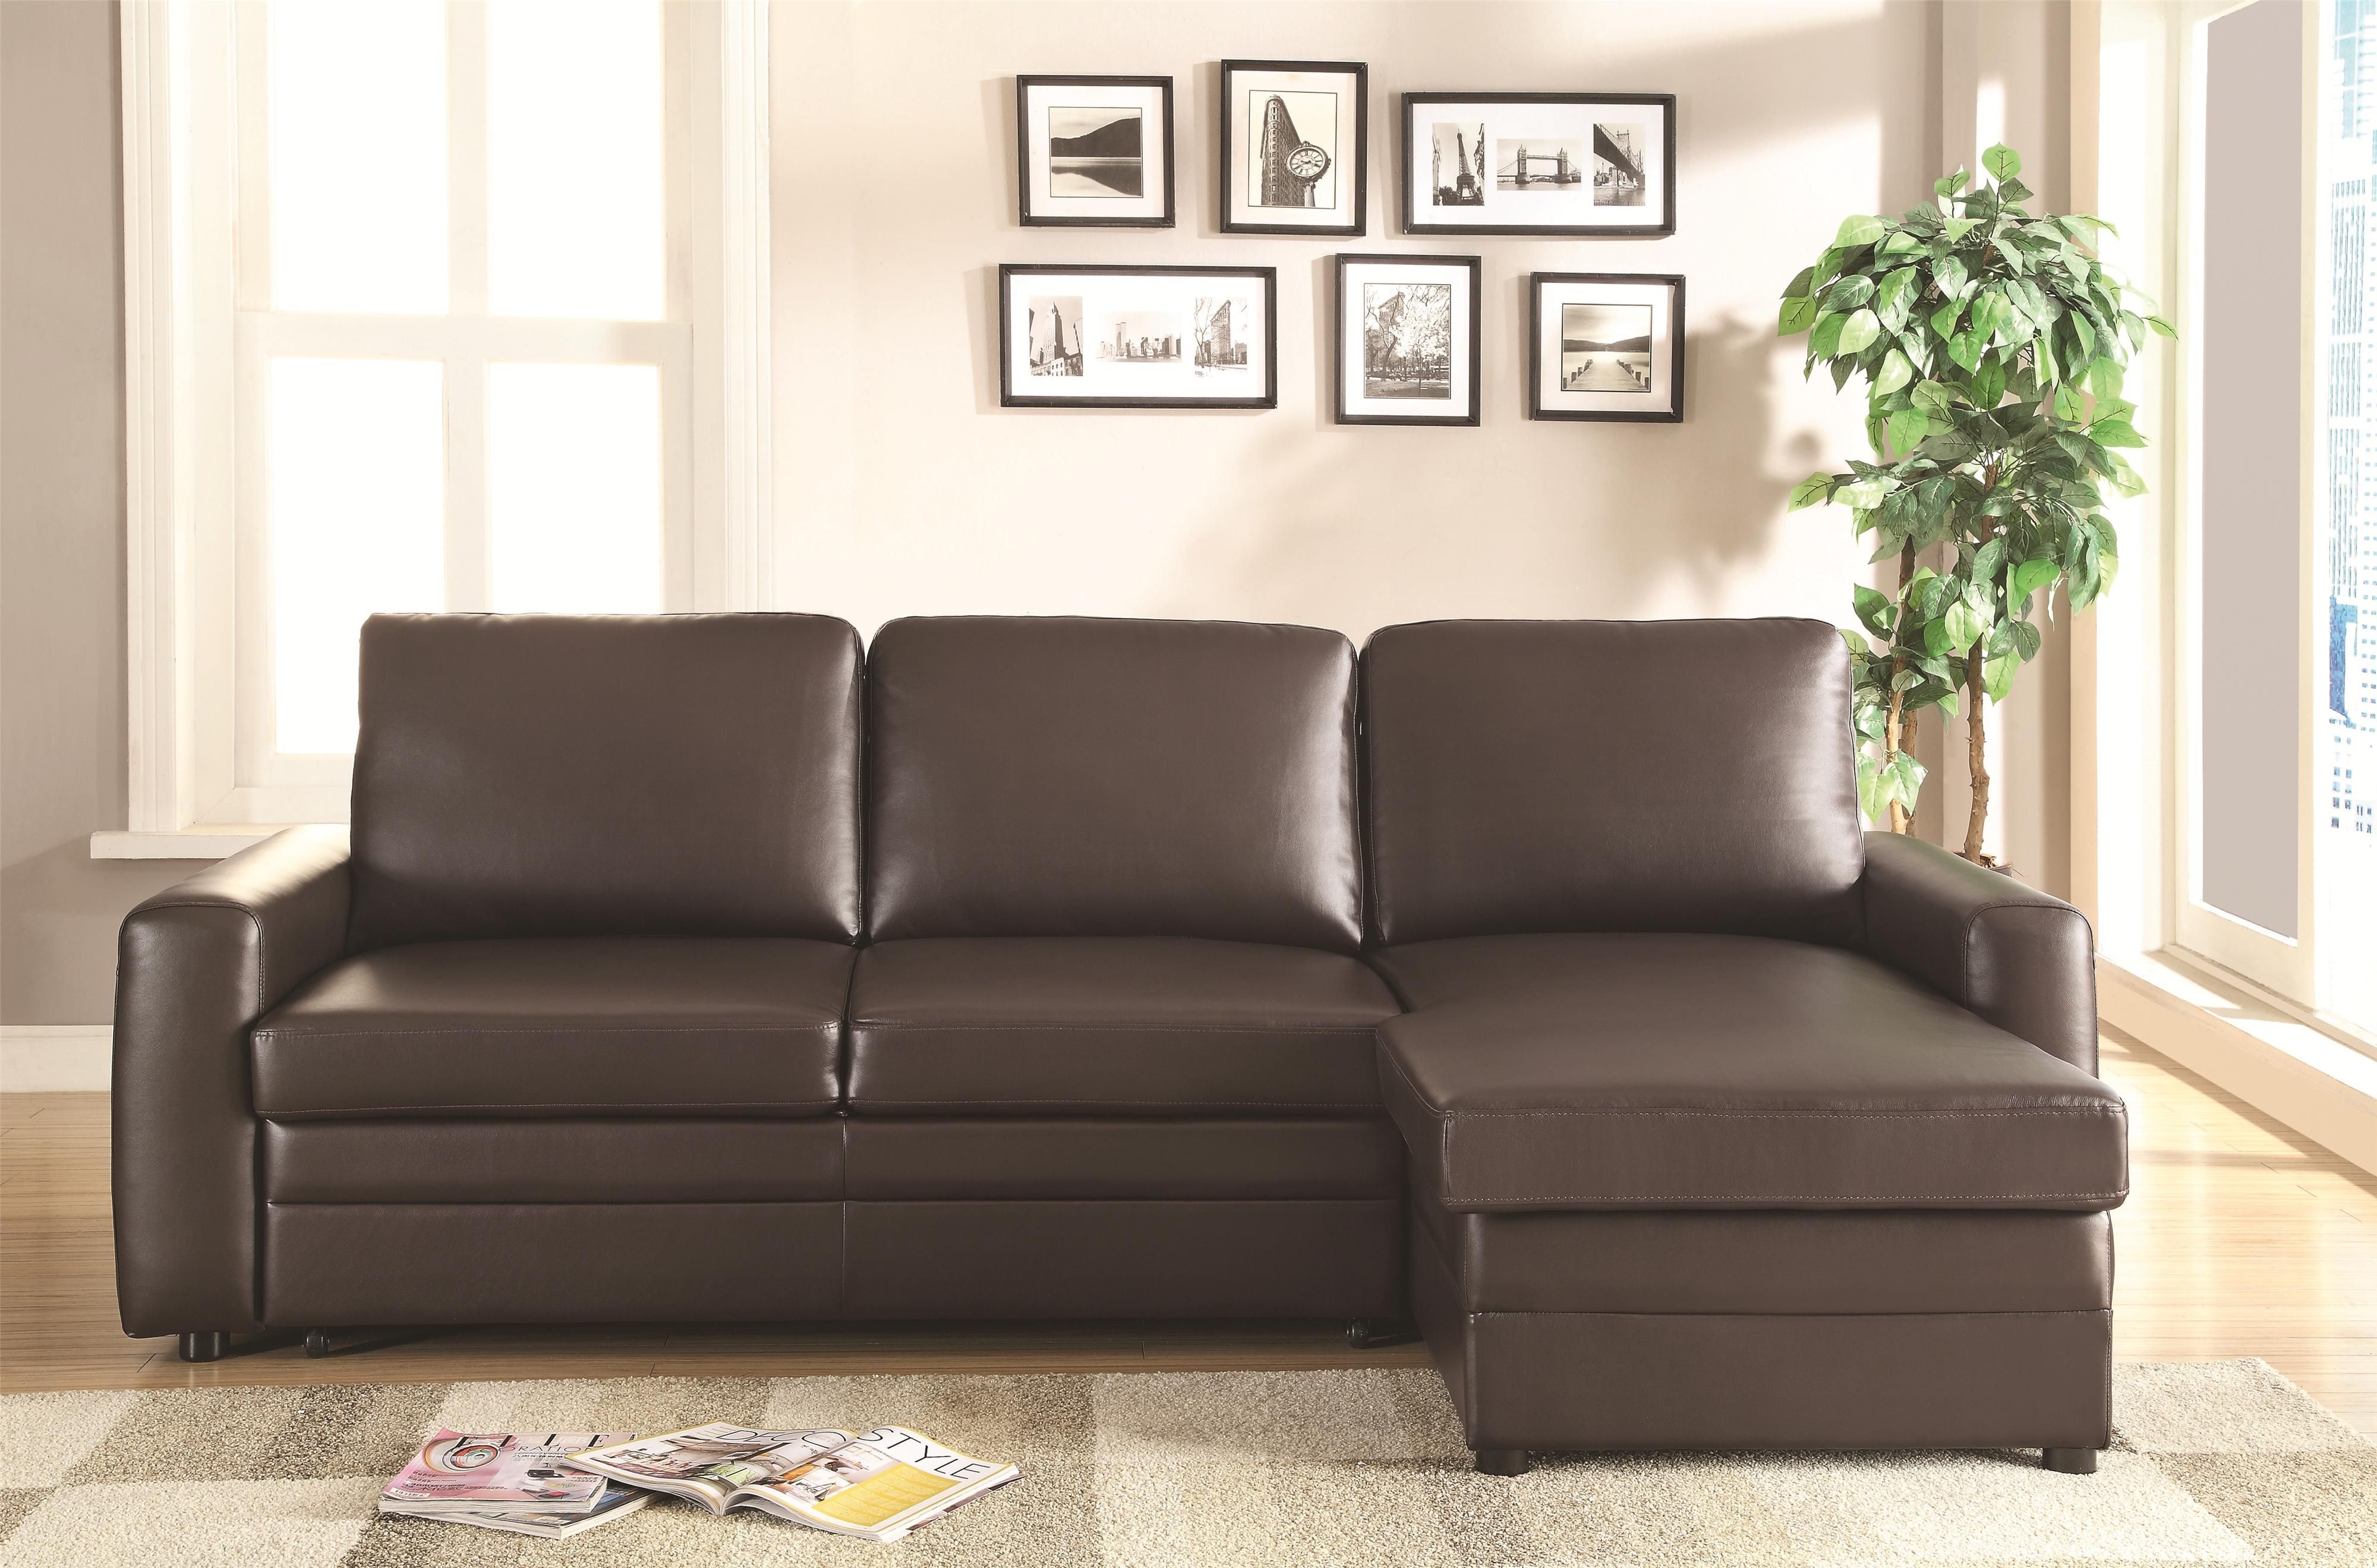 Furniture Della Sectional Sofa With Storage Ott Along Coaster Gus Pertaining To Taren Reversible Sofa/chaise Sleeper Sectionals With Storage Ottoman (View 11 of 30)